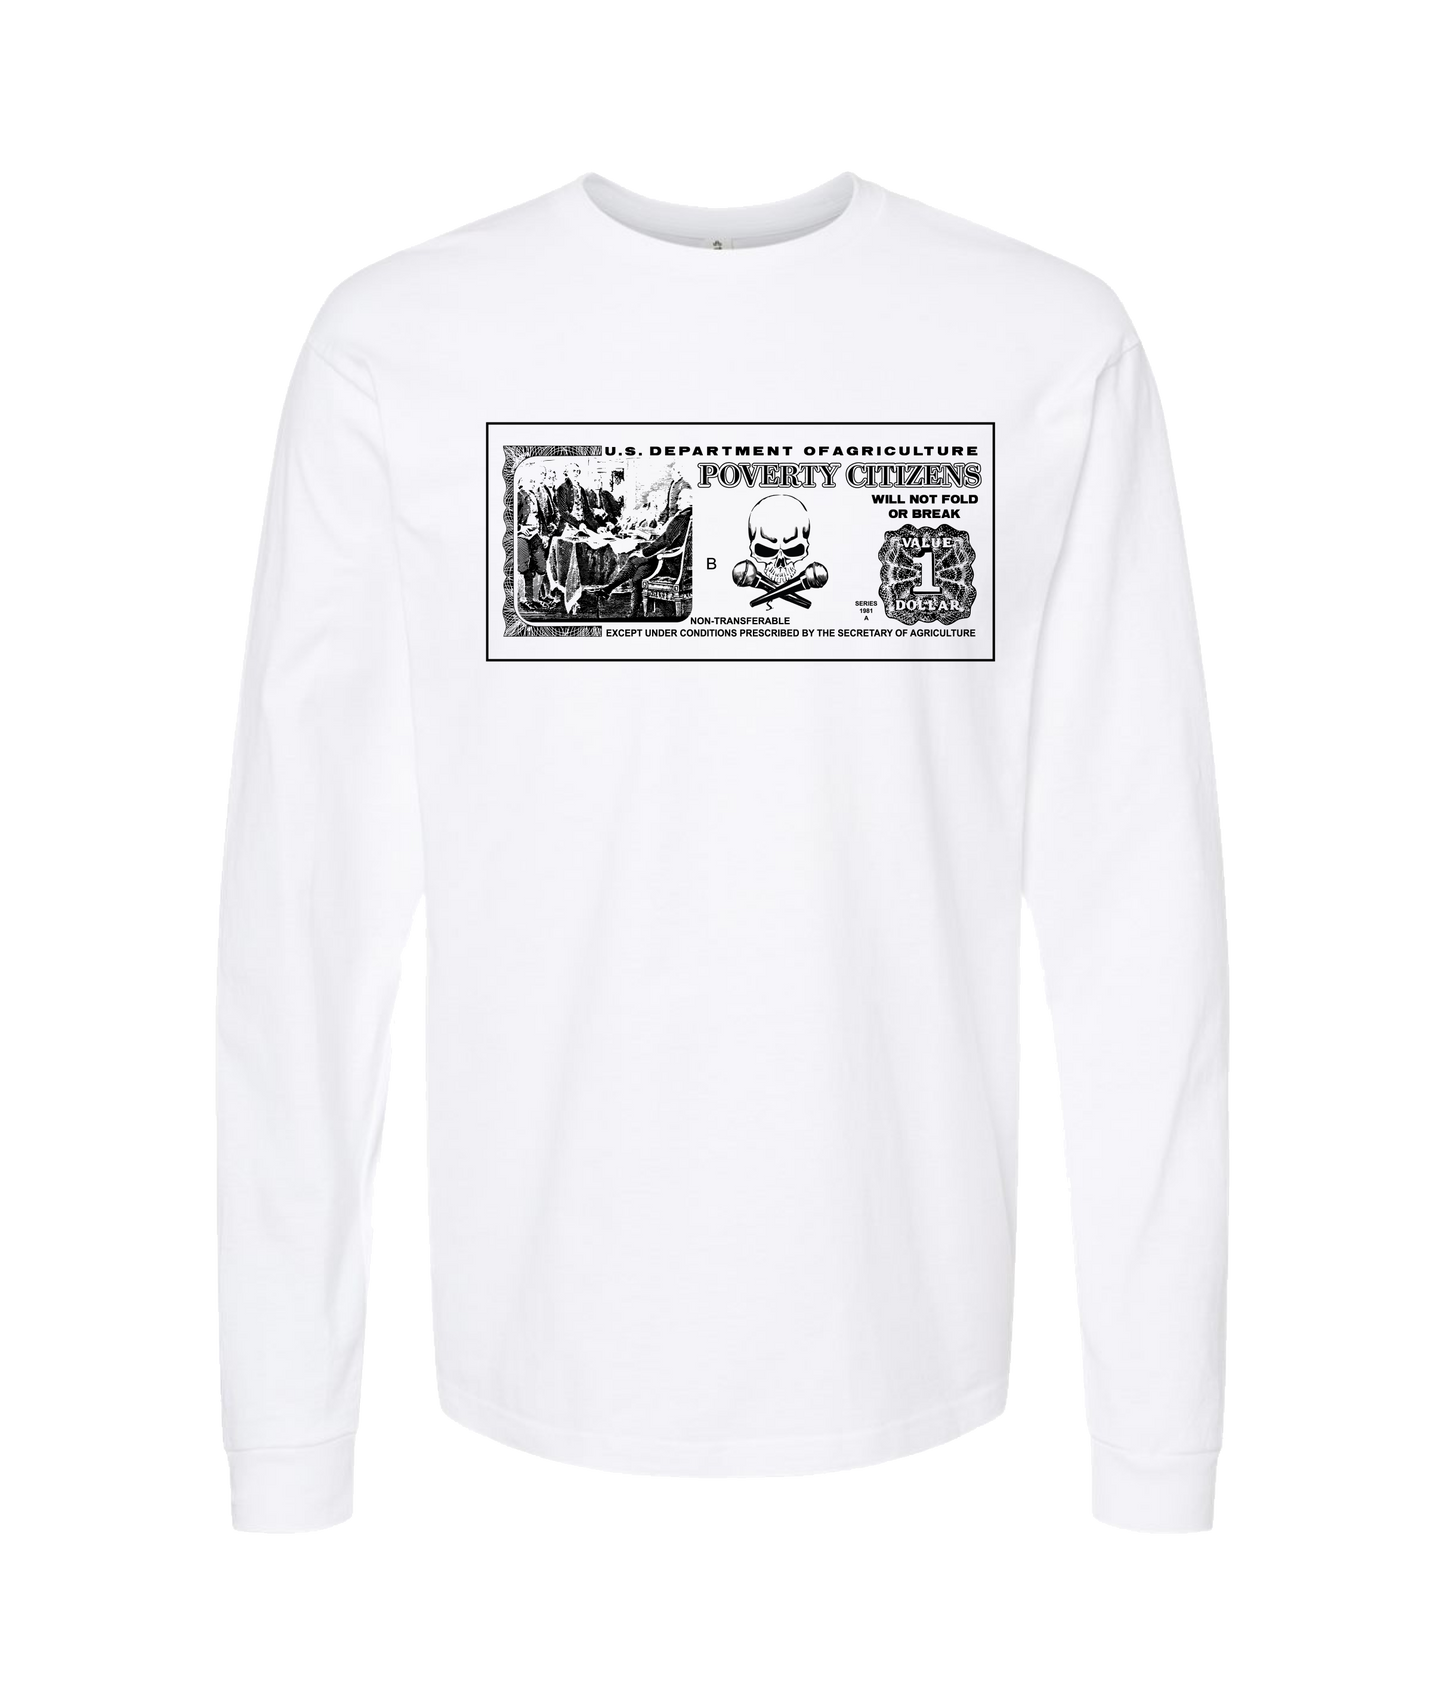 Ep!c of PovCiti - Poeverty Citizens - White Long Sleeve T